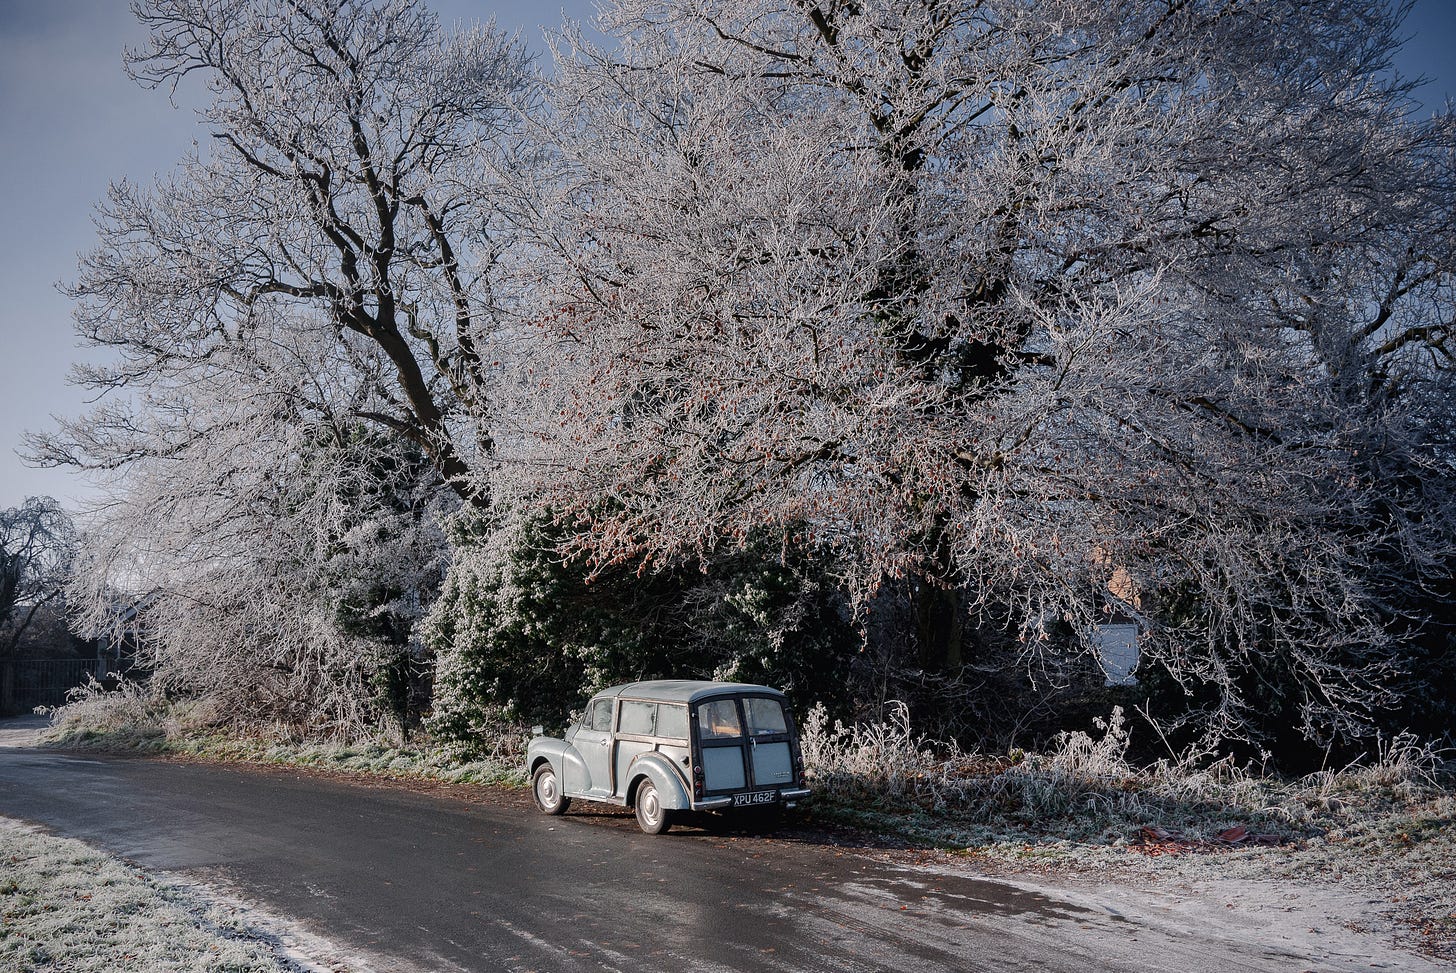 A vintage car sits alone beneath large wintery trees.